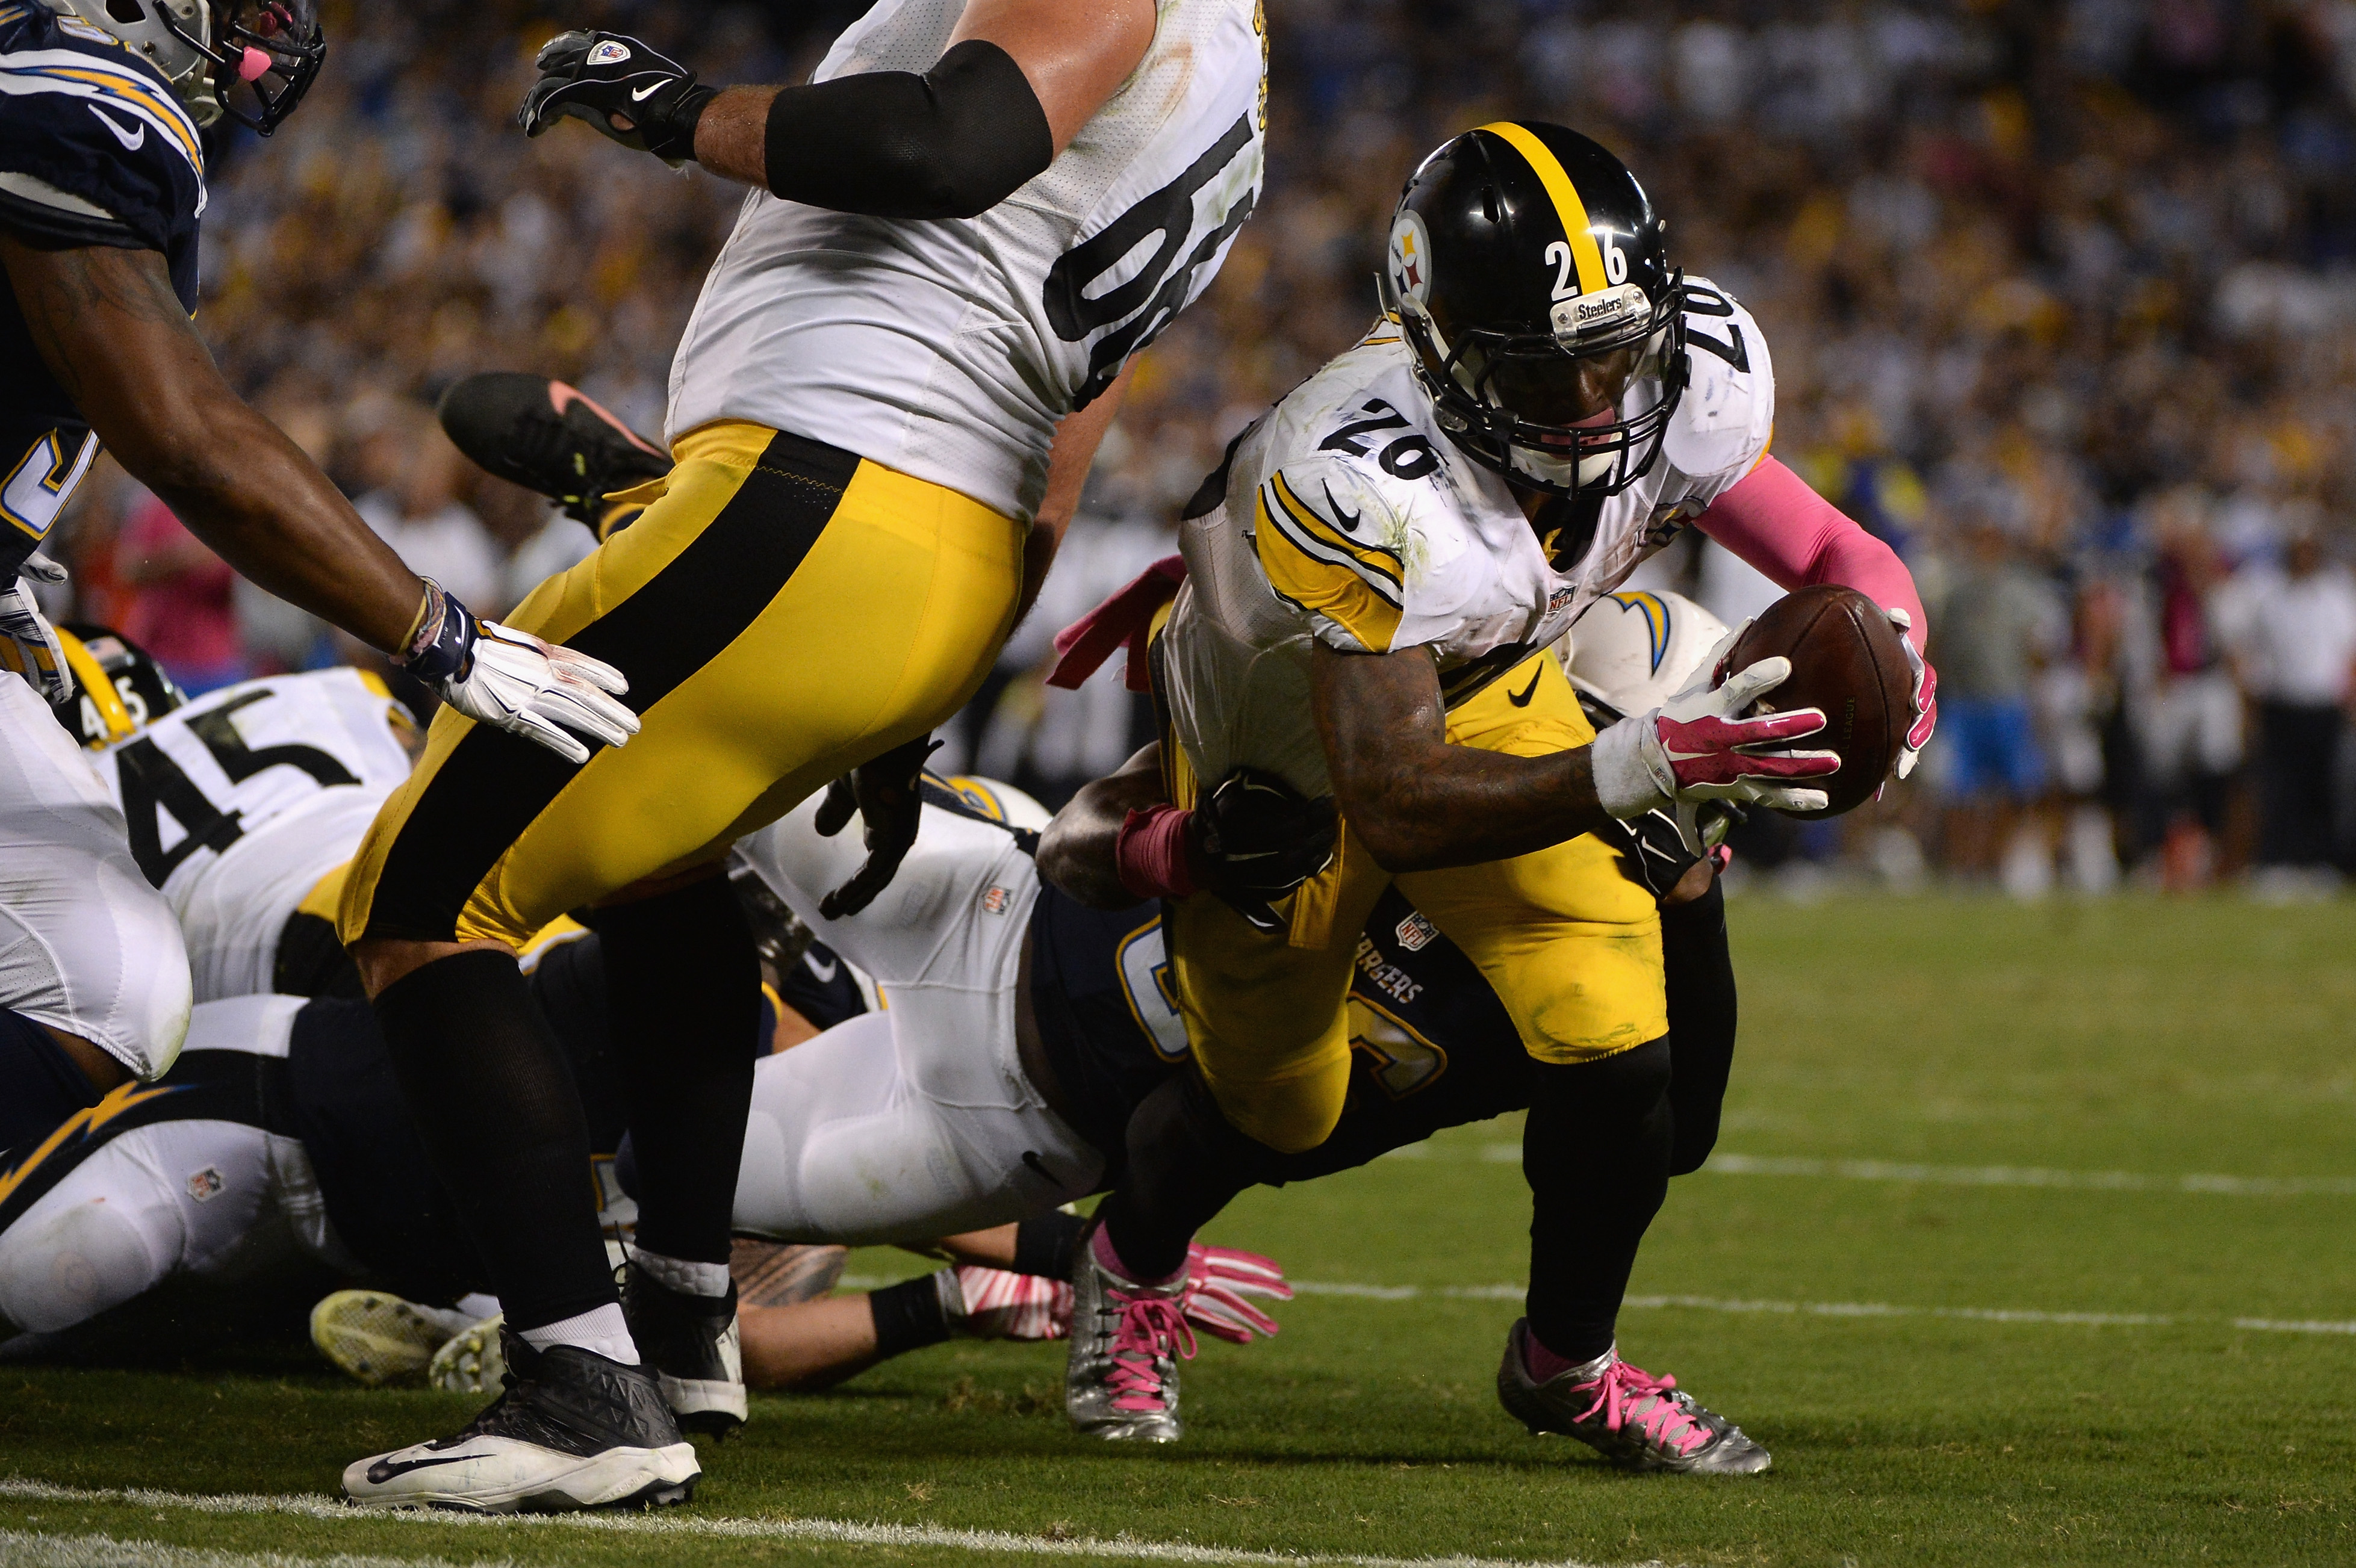 Le'Veon Bell's dive gave the Steelers the win at the buzzer Monday against San Diego. (Getty)